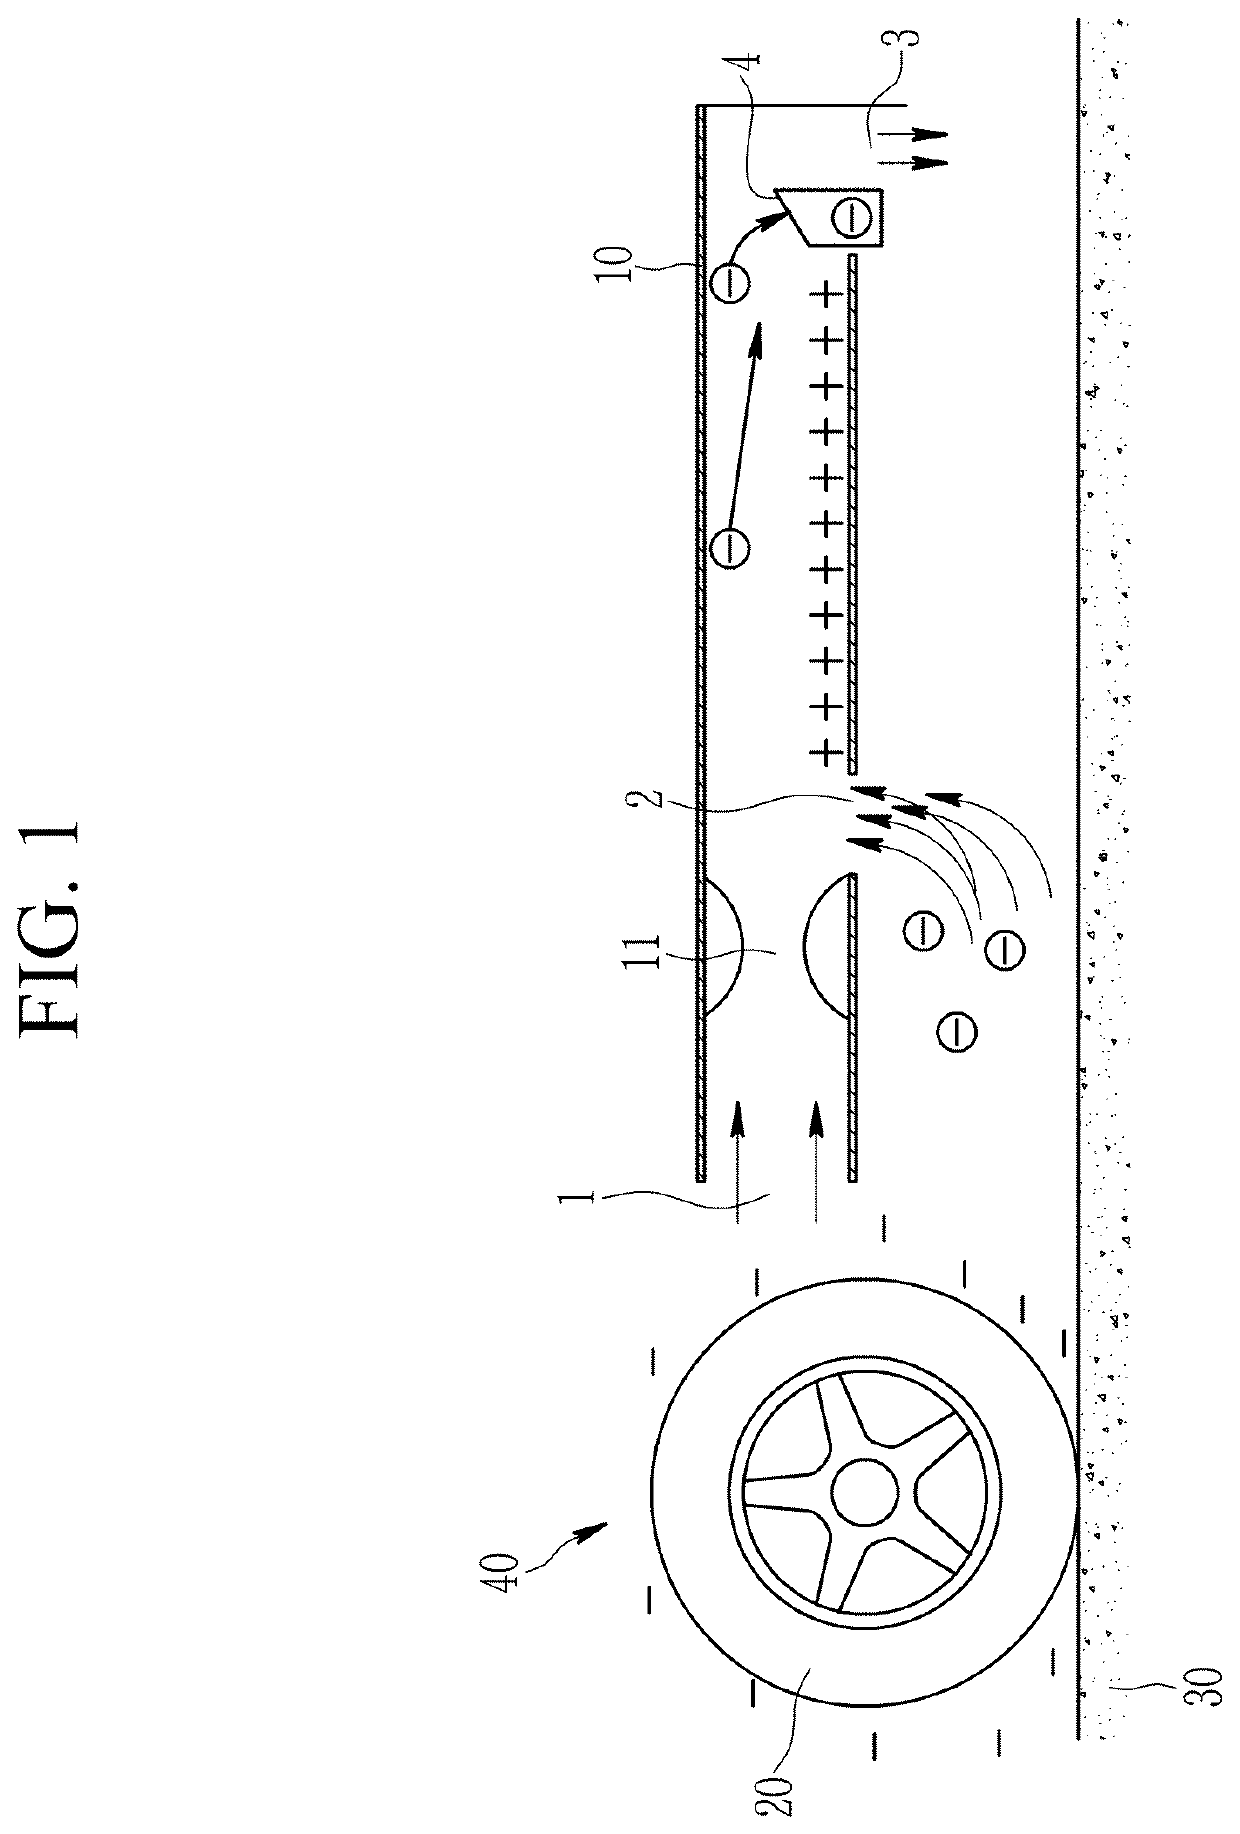 Non-exhaust fine dust collecting device using triboelectricity